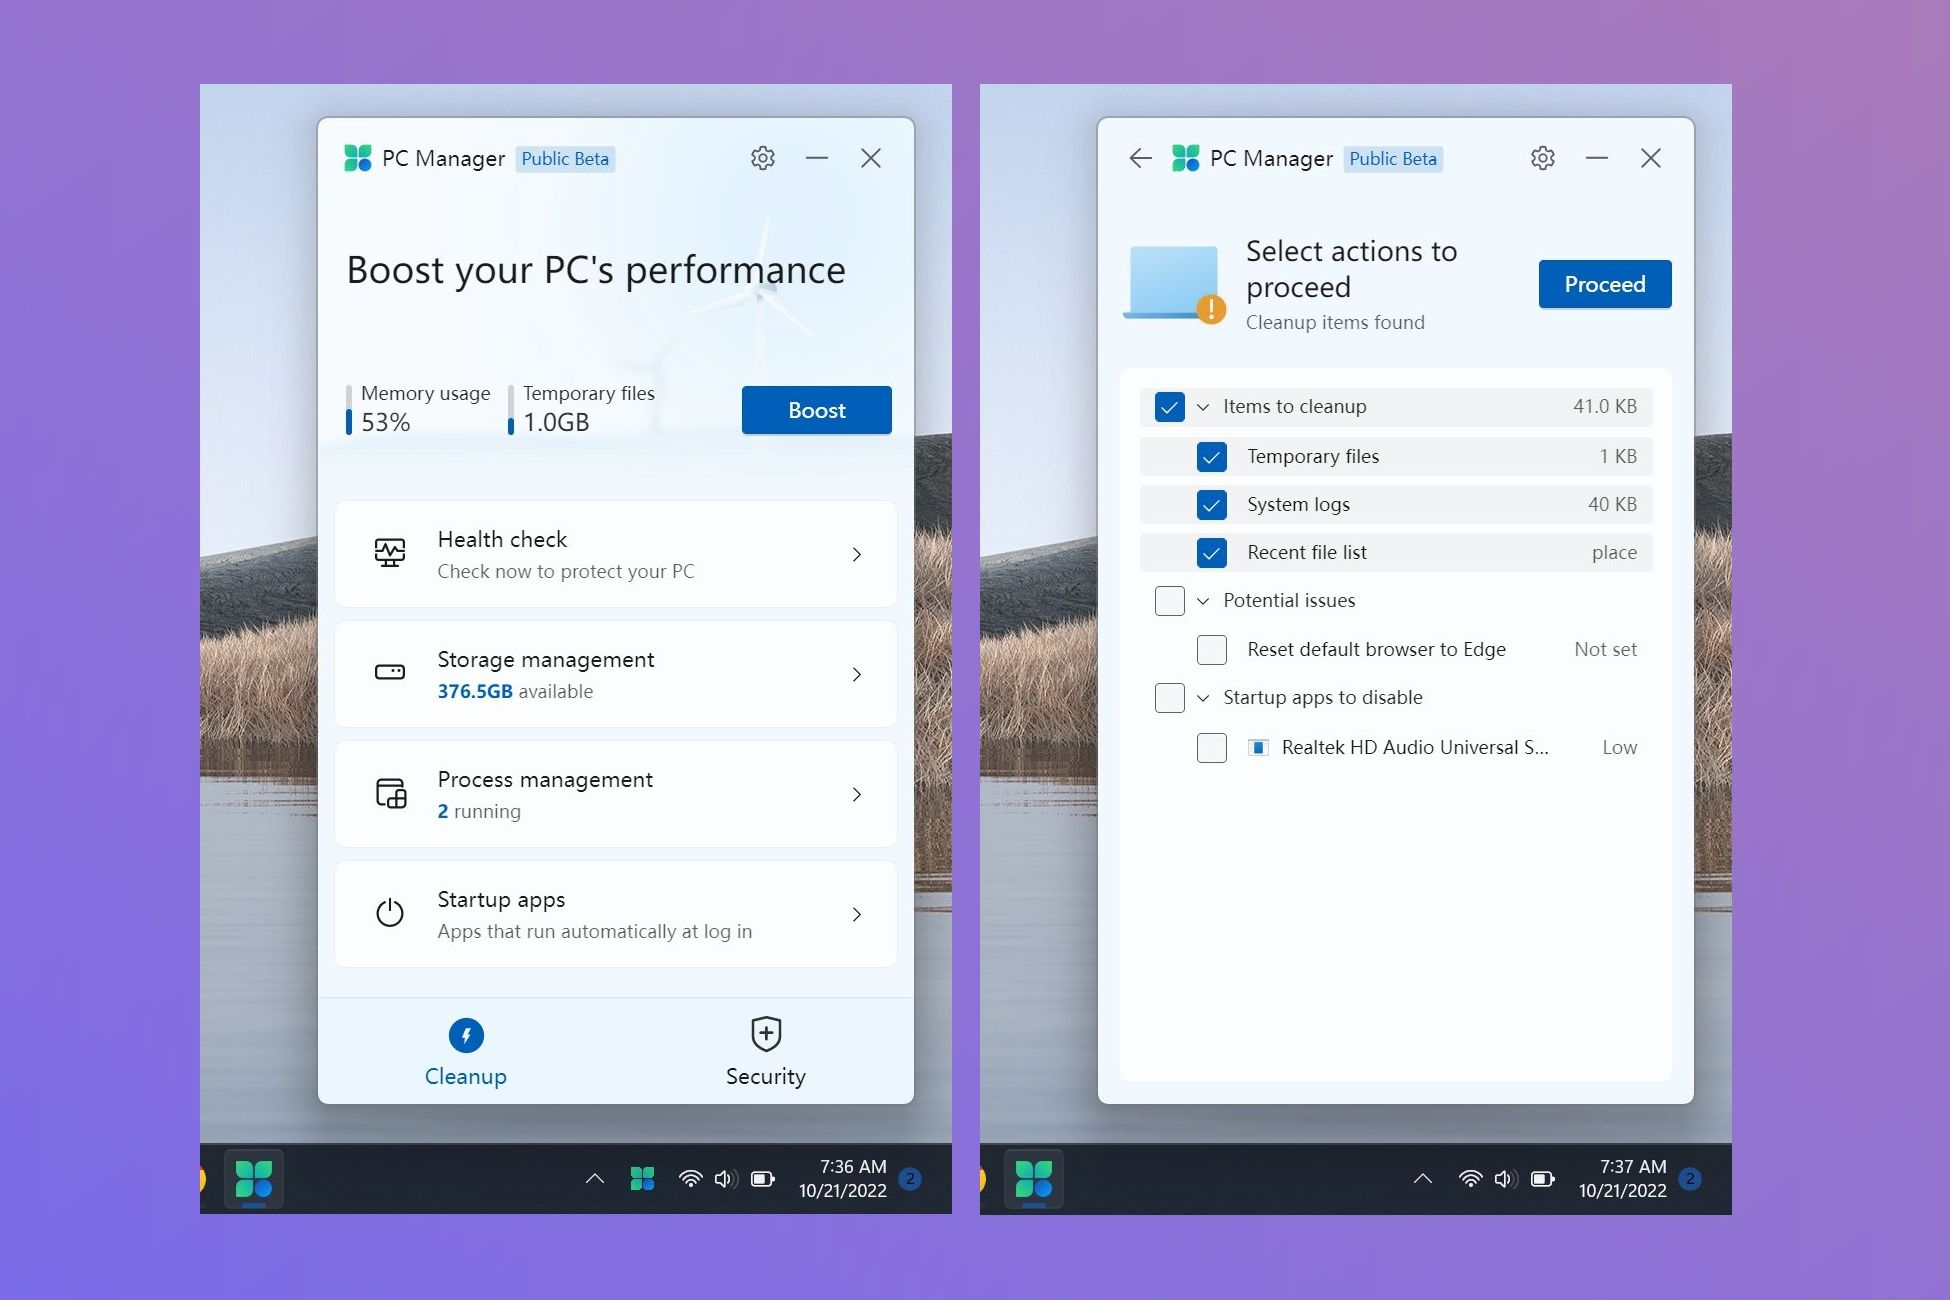 Two screenshots of the Microsoft PC Manager app over a purple gradient background